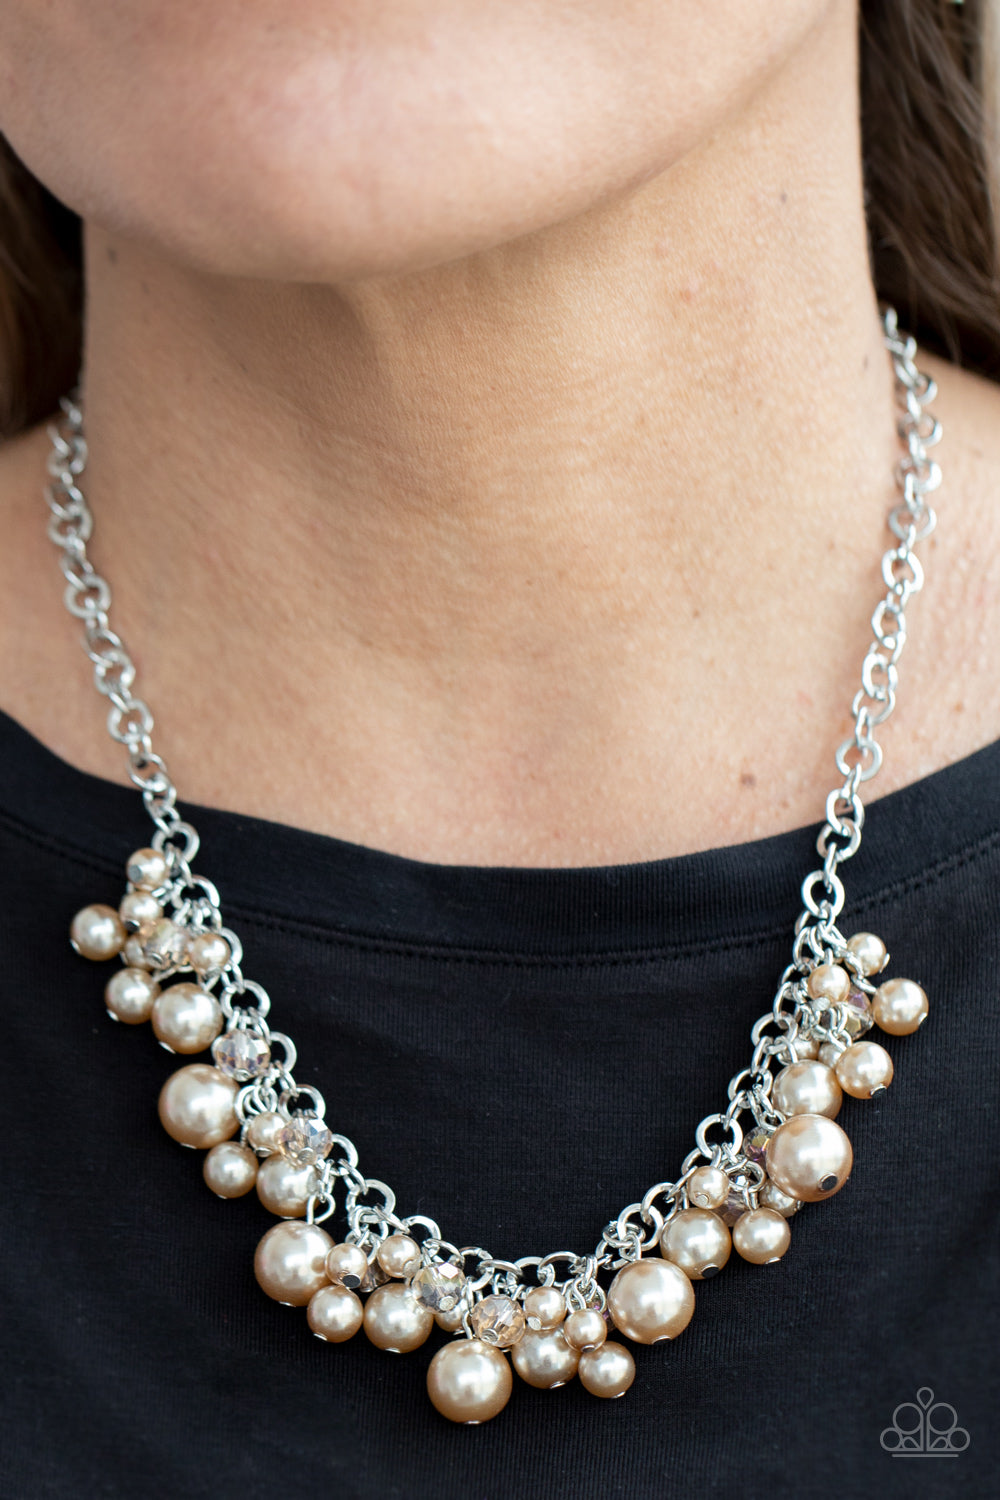 Paparazzi necklace 2 pc set | Necklace, Jewelry, Pearl necklace